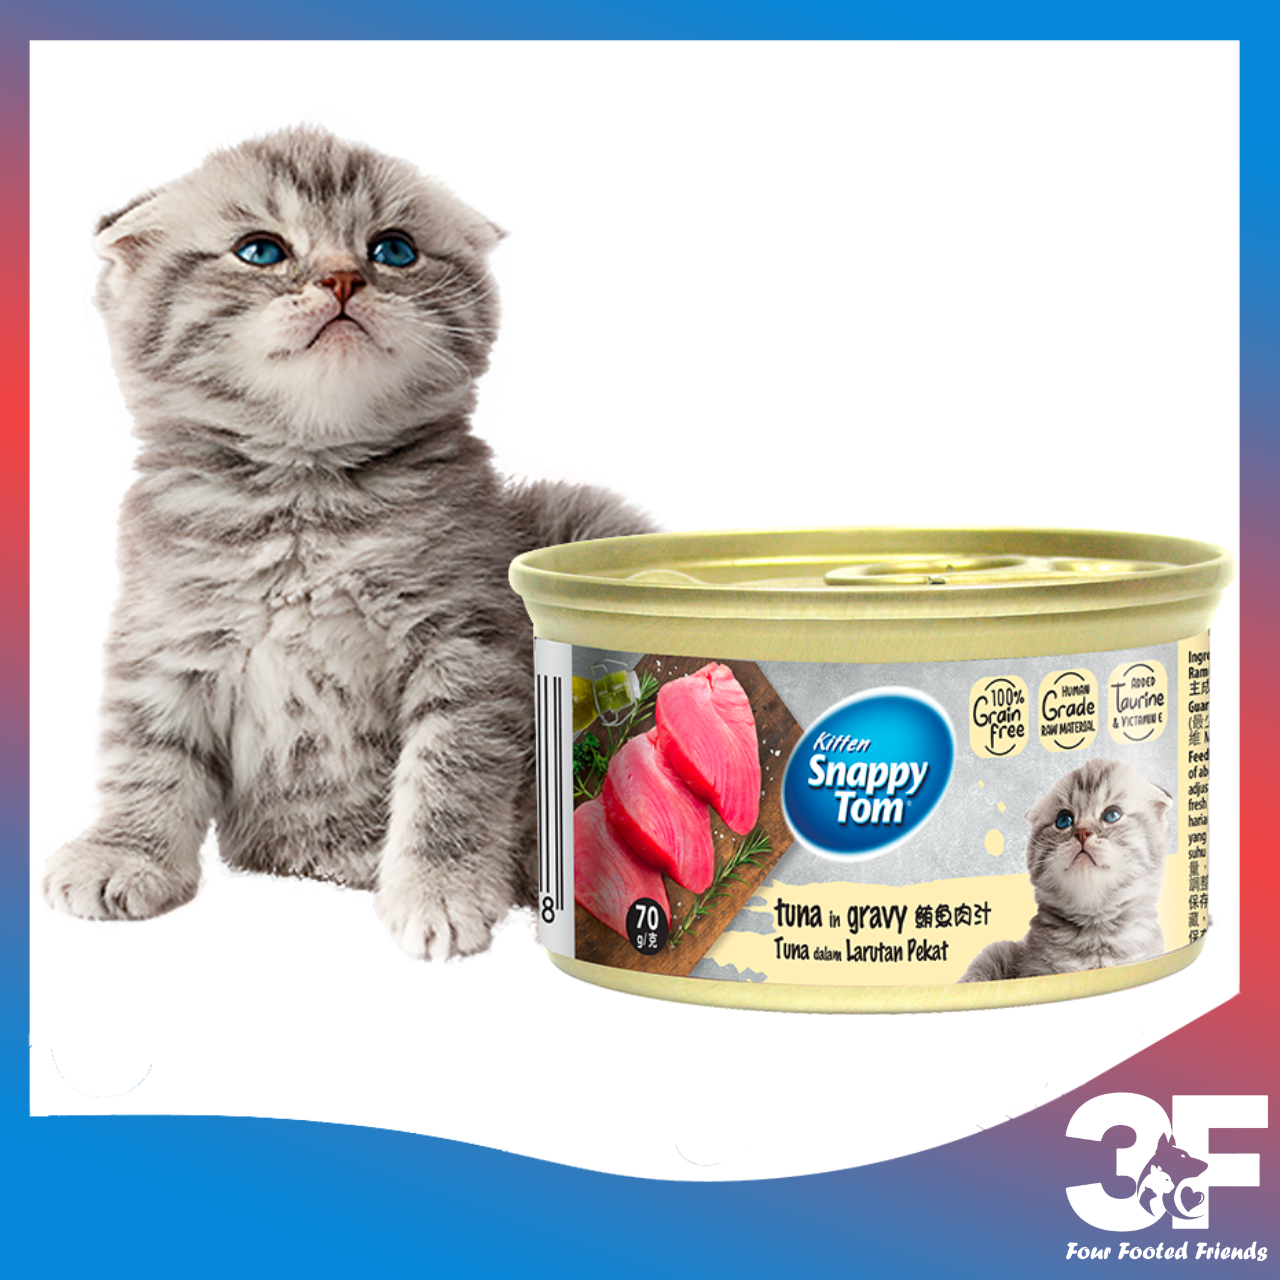 snappy tom kitten wet food review